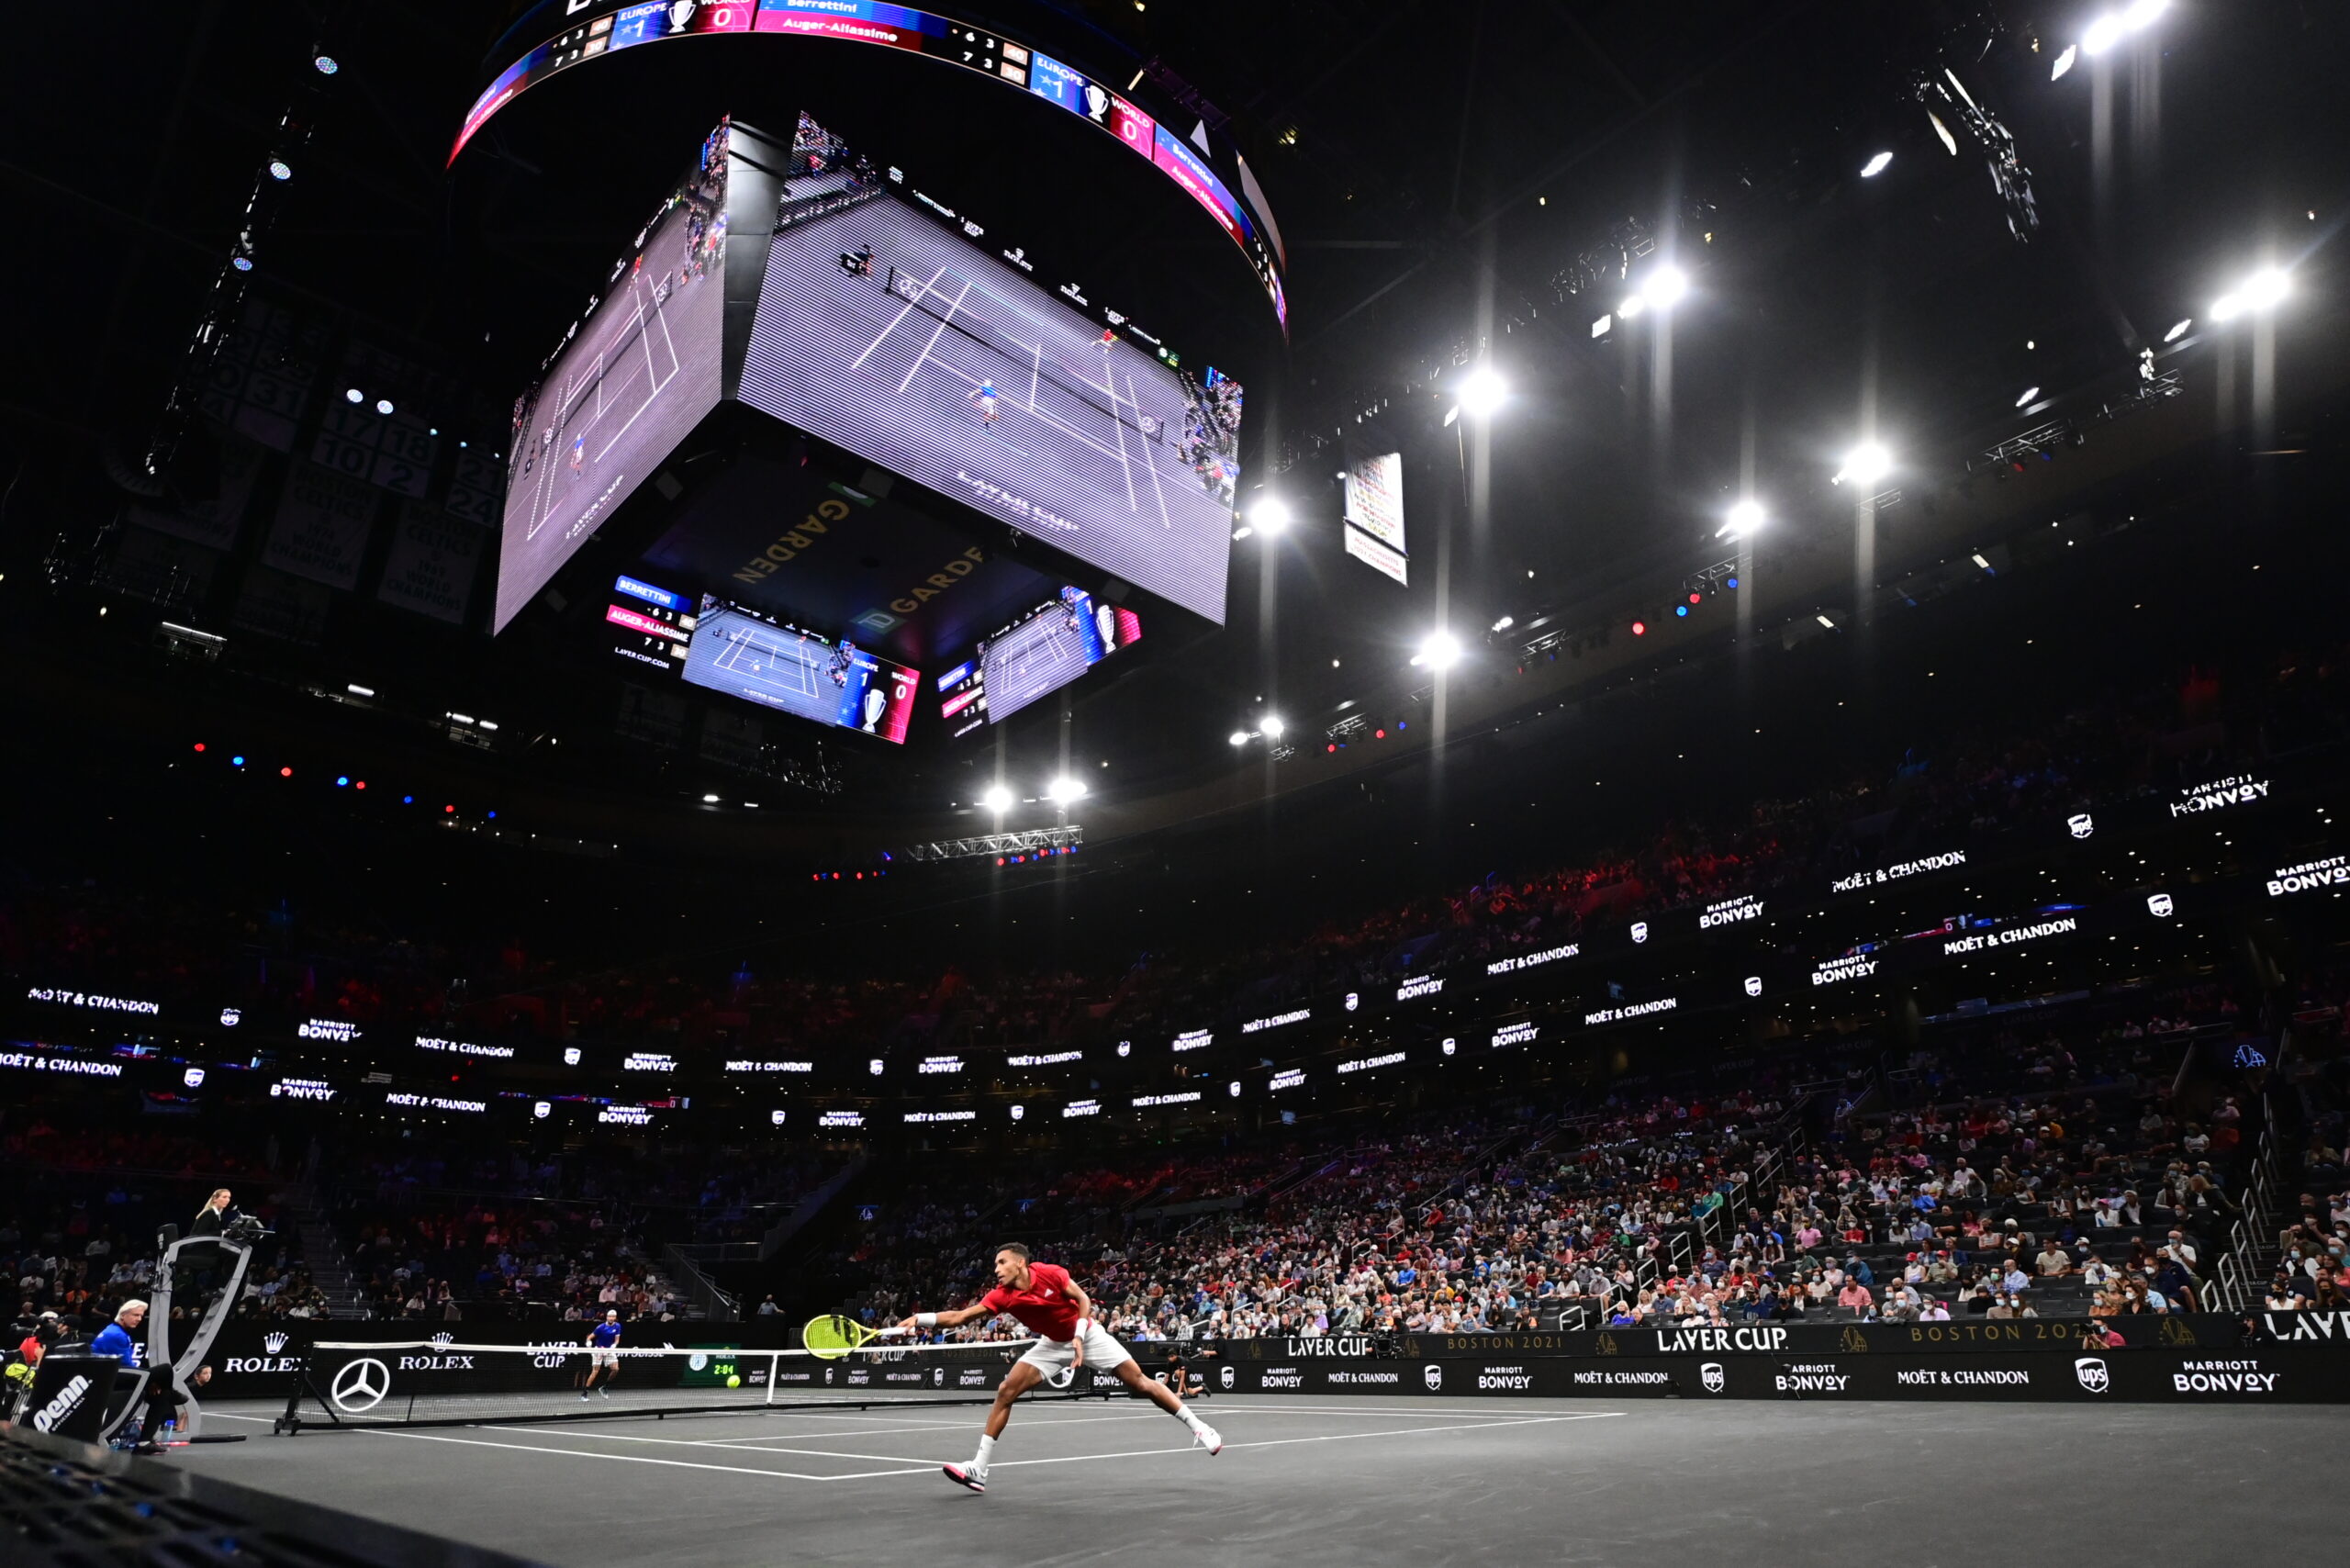 Watch the Laver Cup Tennis Tournament at Rogers Arena